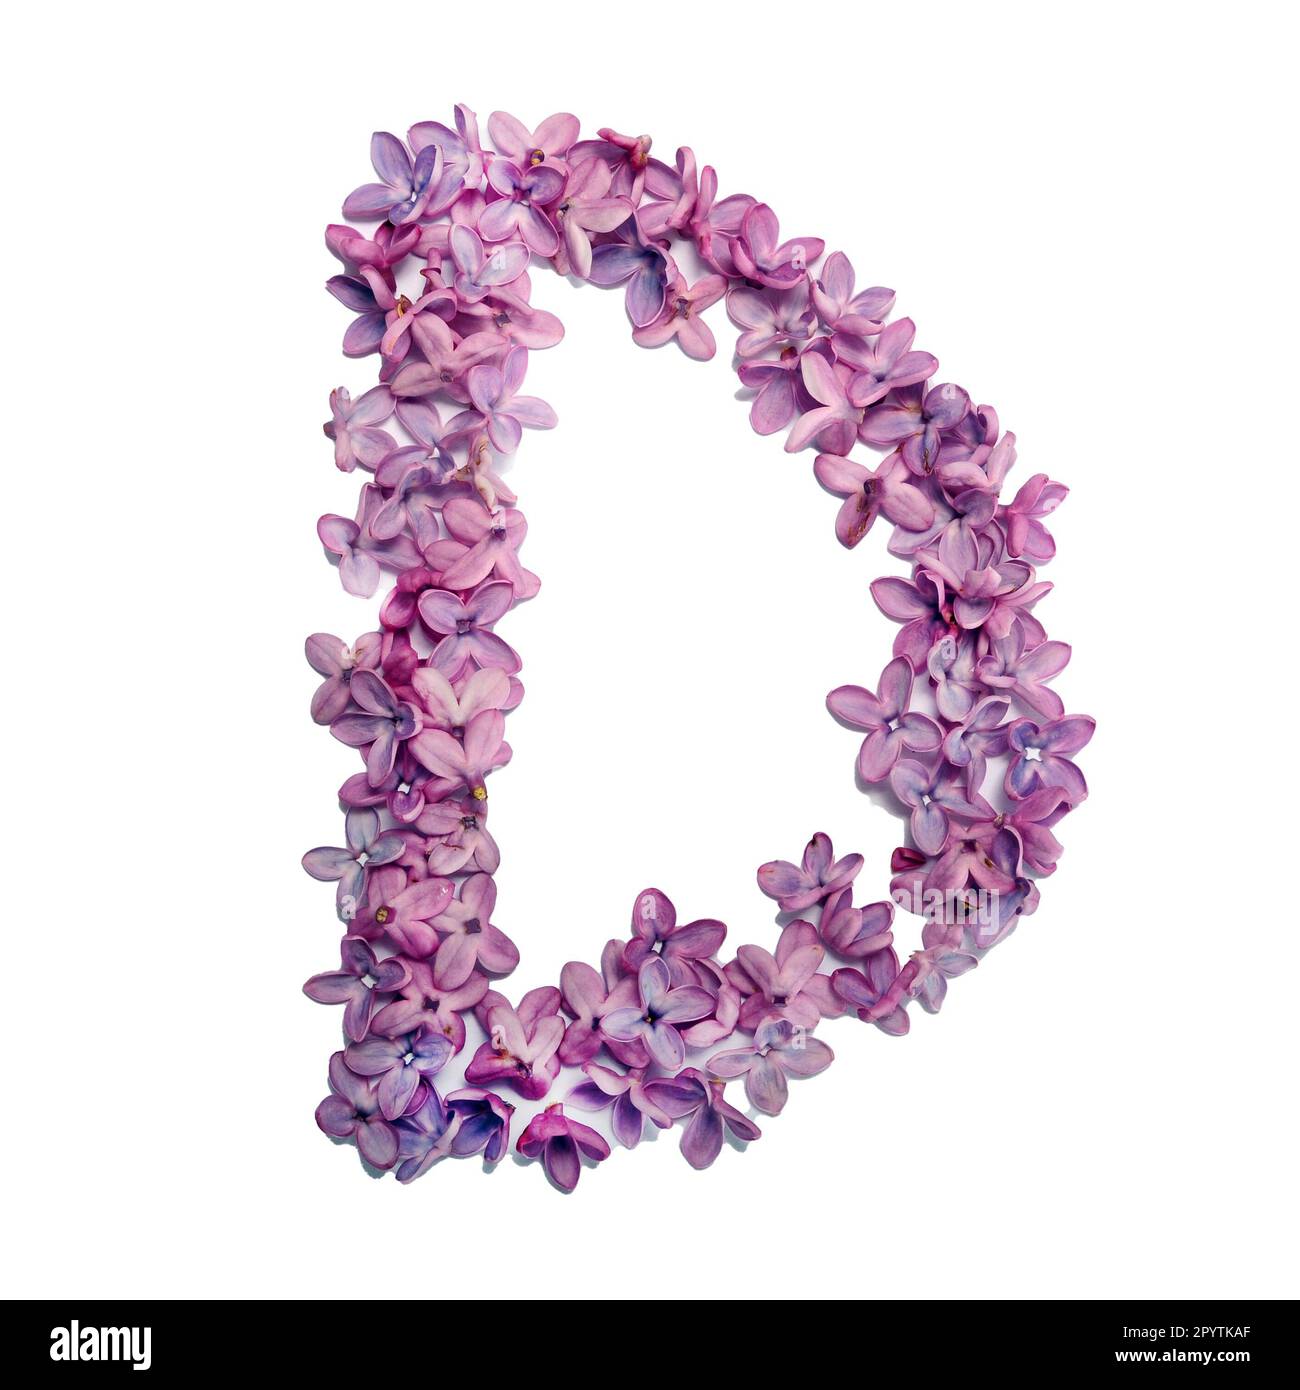 The letter D made of lilac flowers.  Square photo with white background. Stock Photo